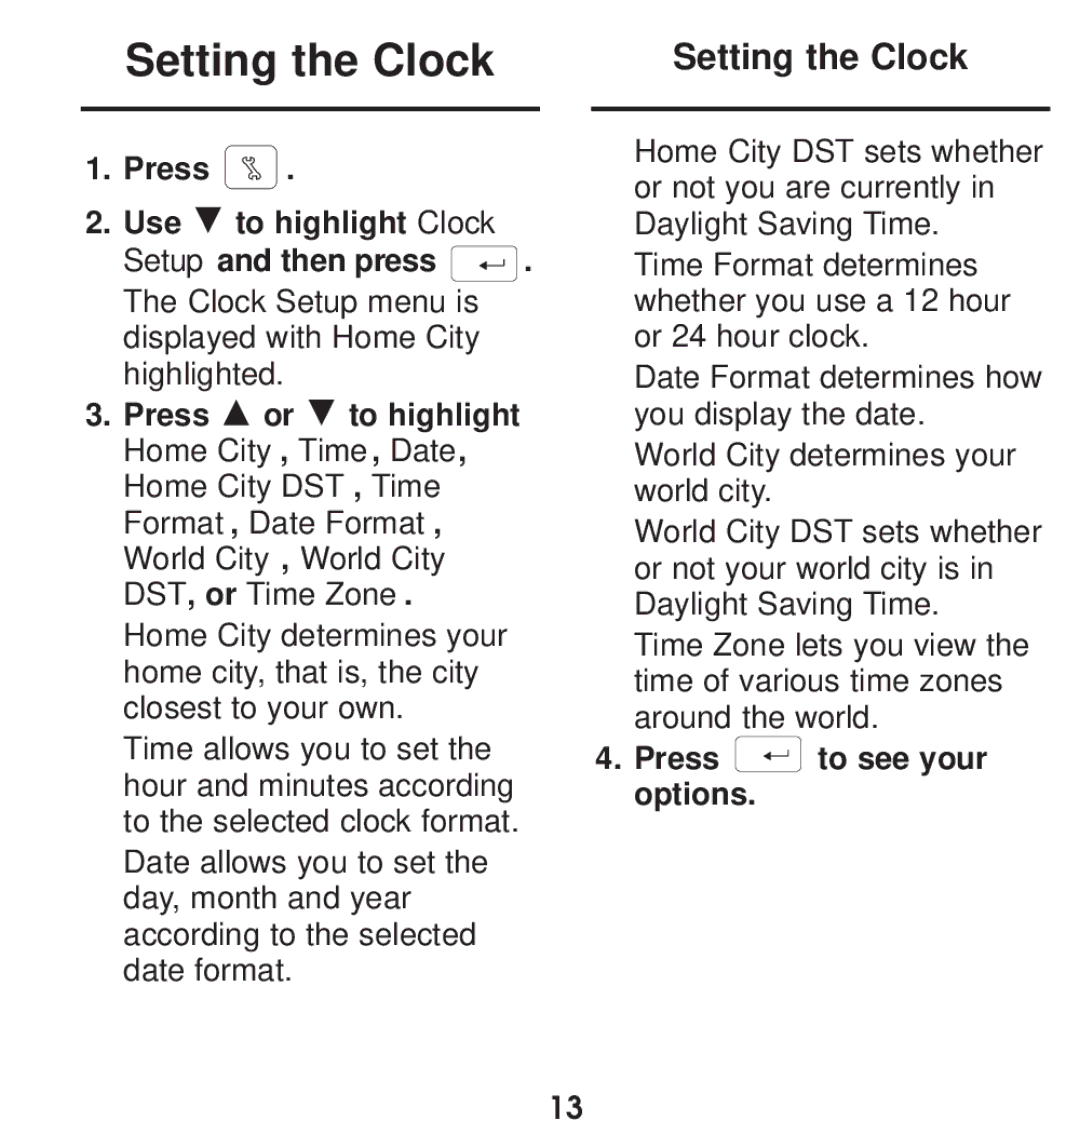 Franklin TGA-490 manual Setting the Clock, Press to see your options 